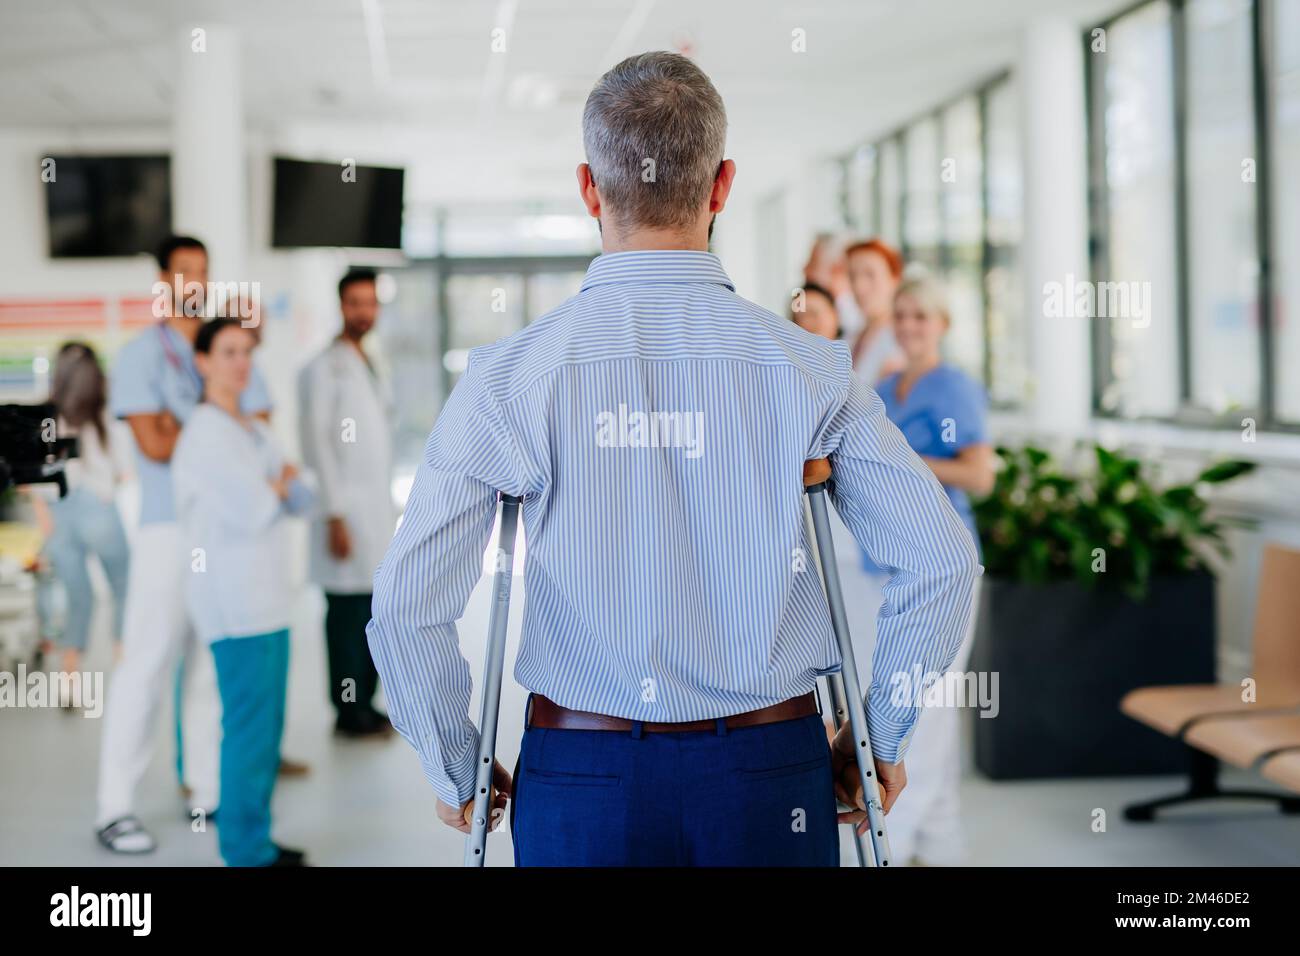 Medical staff clapping to patient who recovered from serious accident. Stock Photo